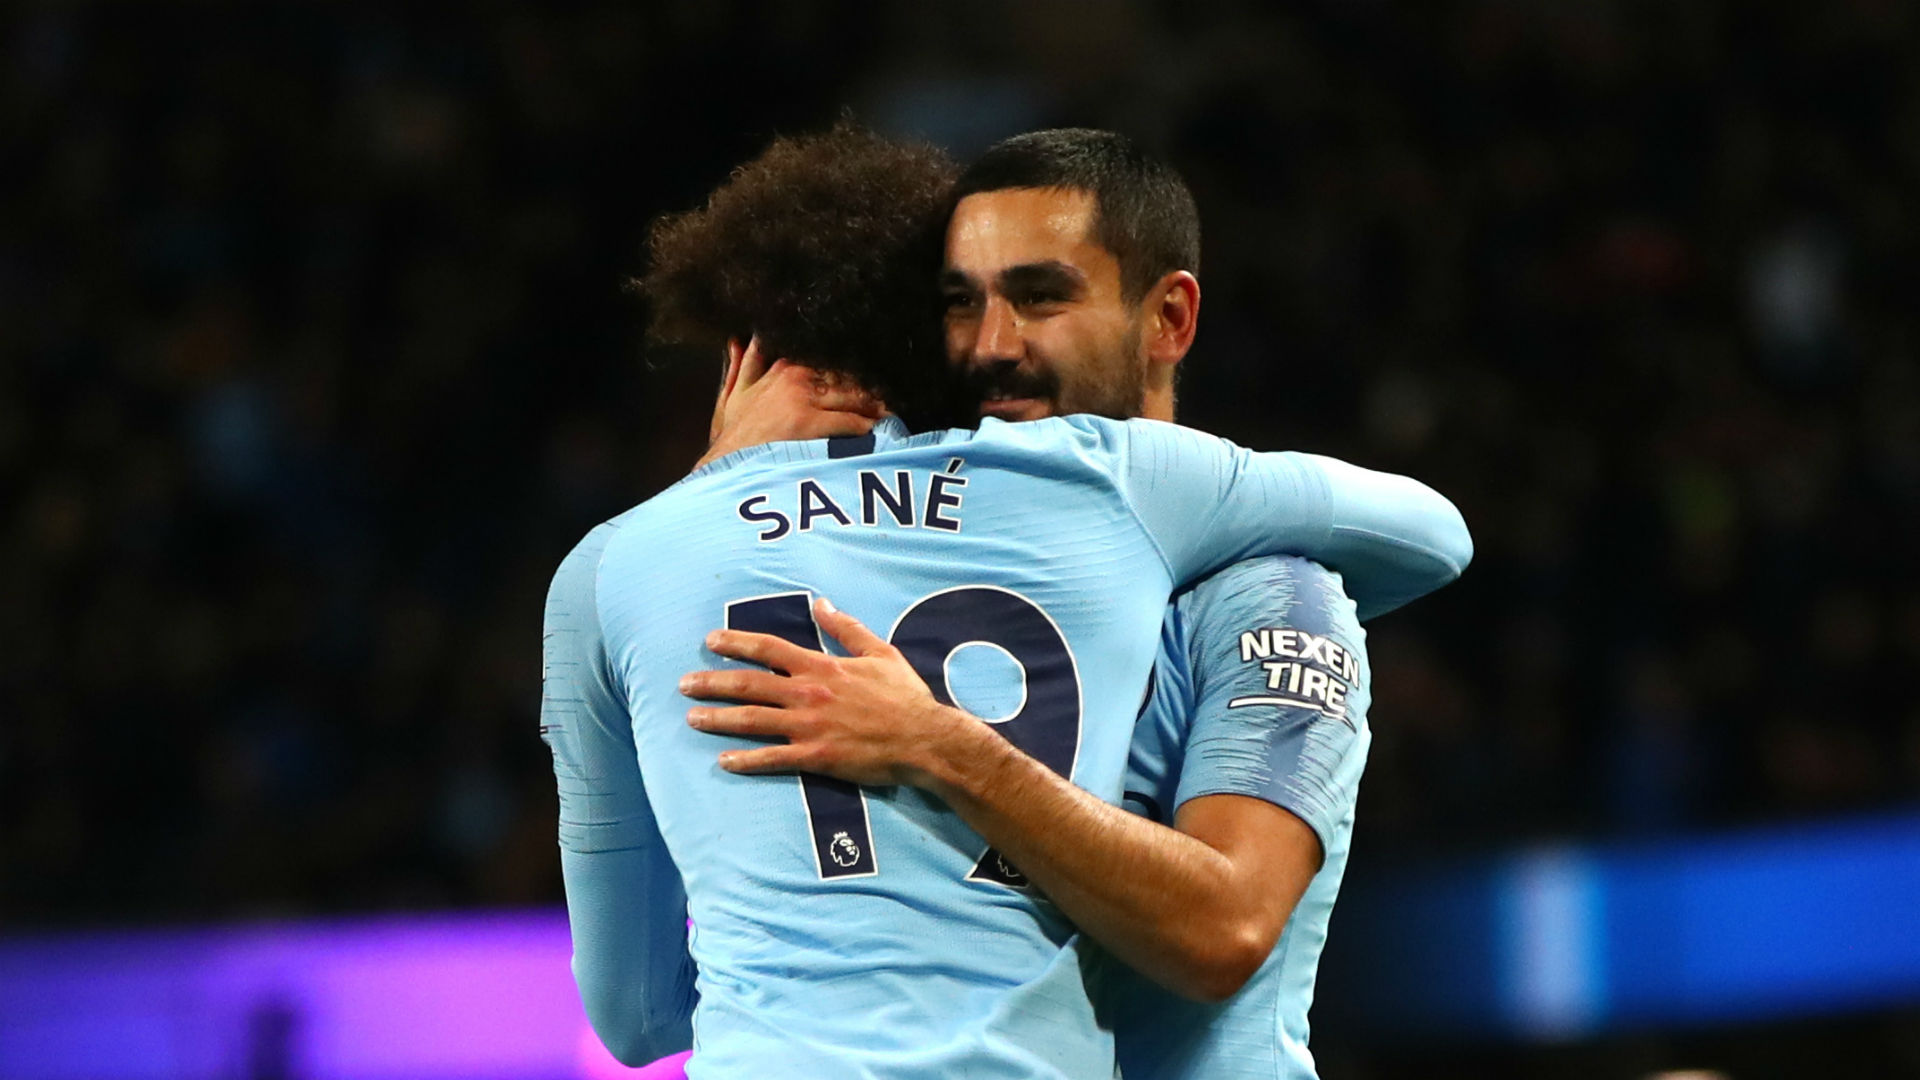 Bayern Munich have been linked with a move for Leroy Sane but Ilkay Gundogan is confident Manchester City will do all they can to keep him.